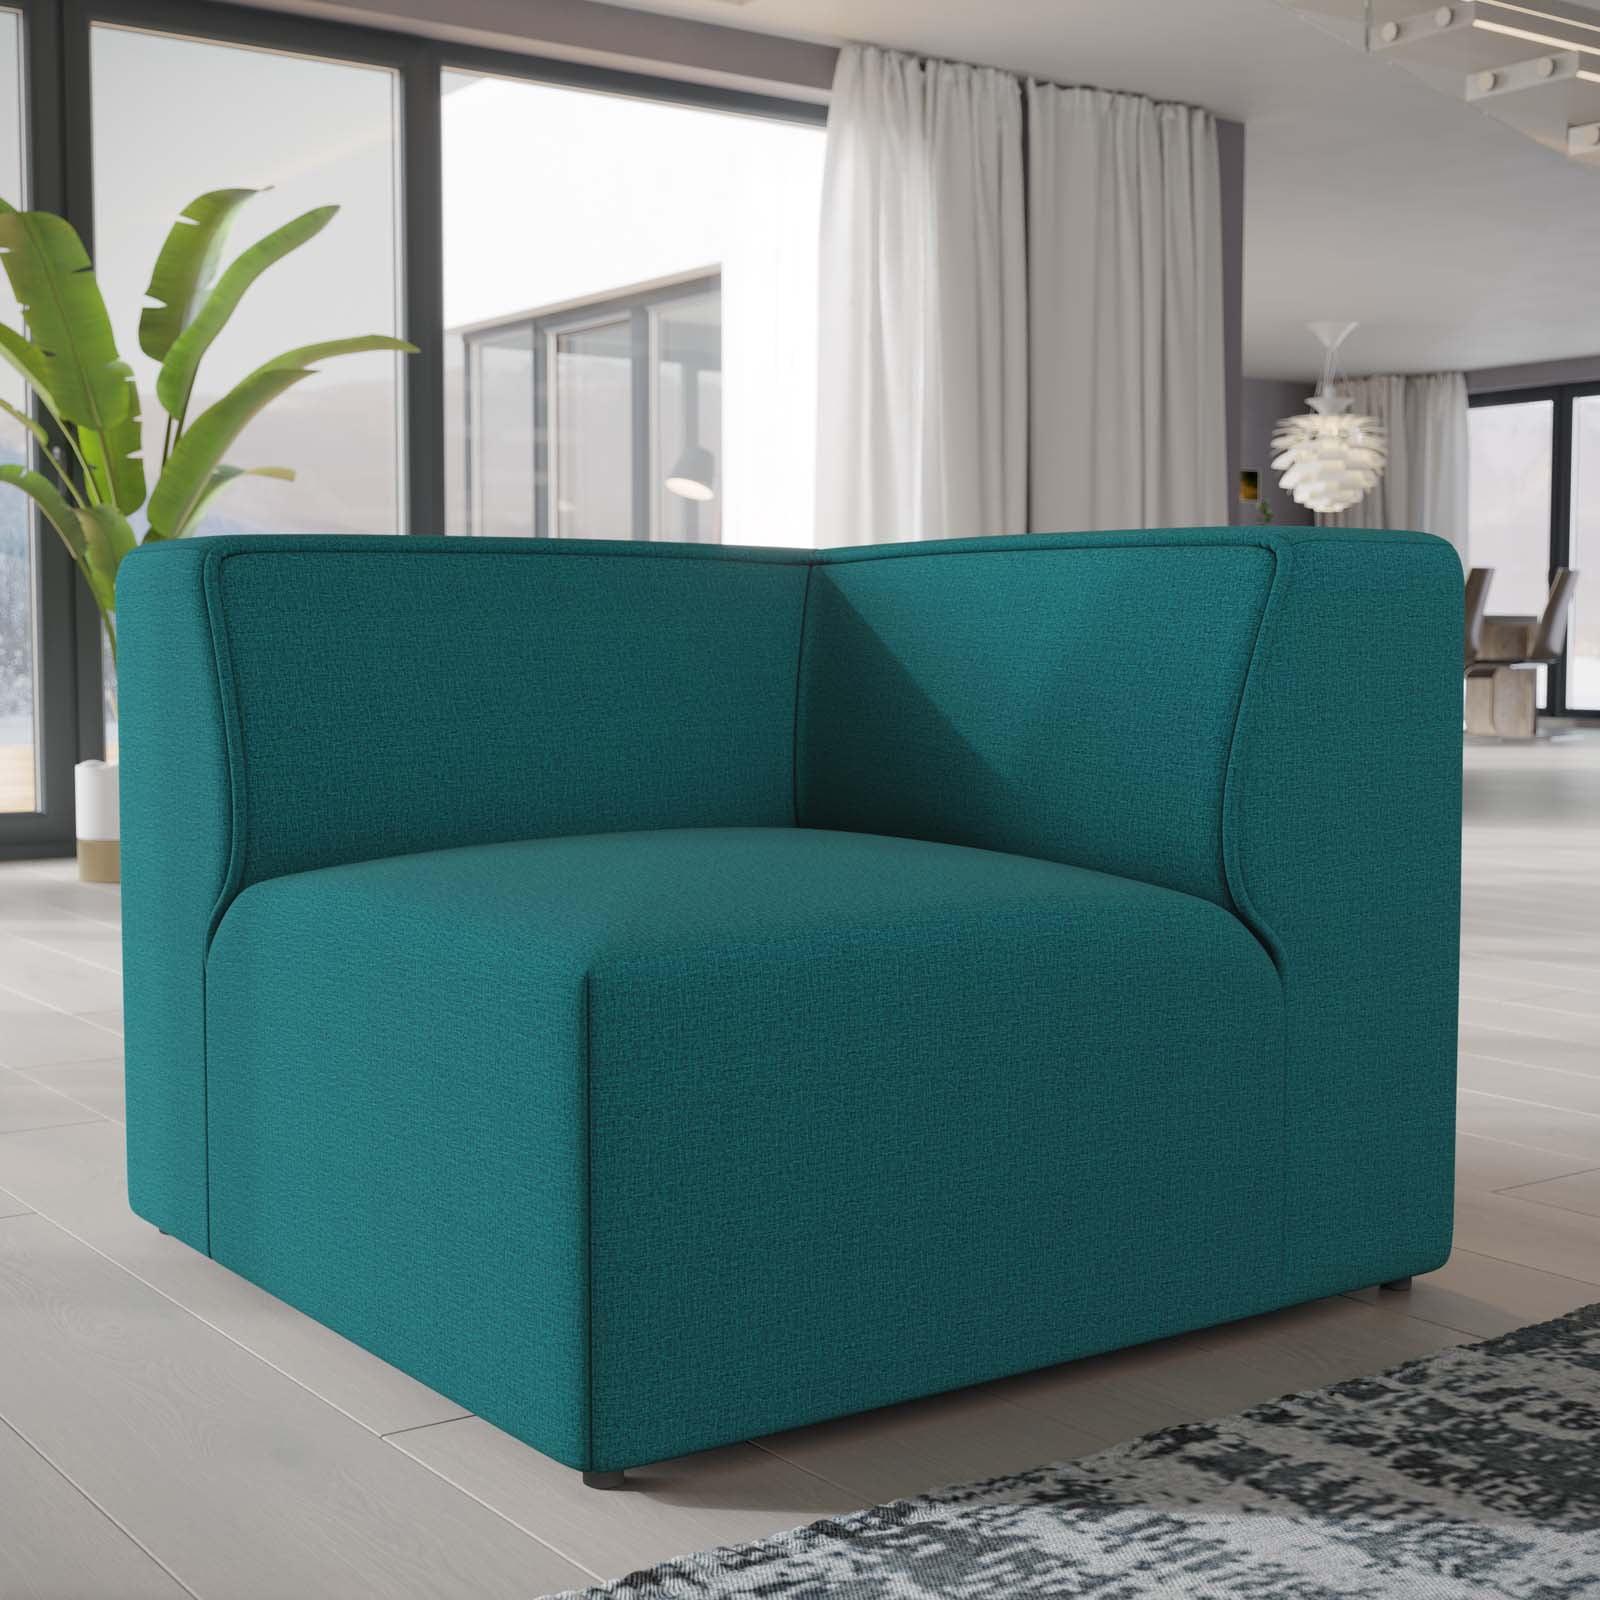 Modway Mingle Expansive Teal Corner Sofa with Elegant Piping